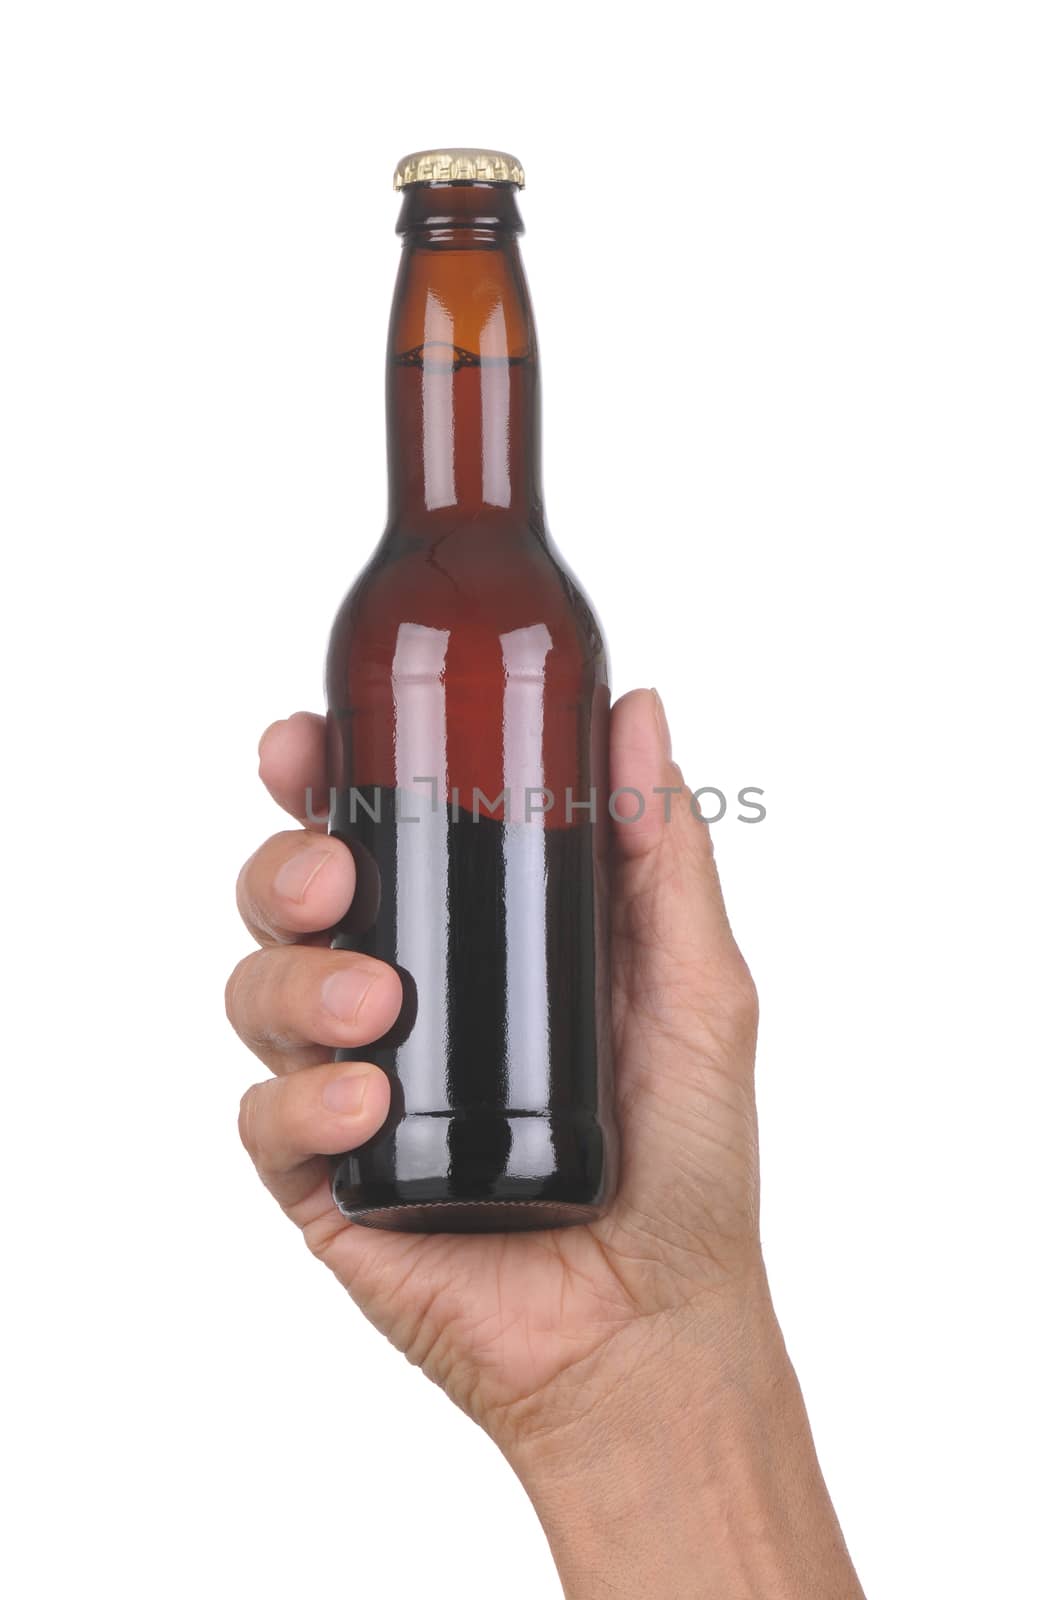 Man's hand holding up a brown beer bottle without label over a white background vertical format